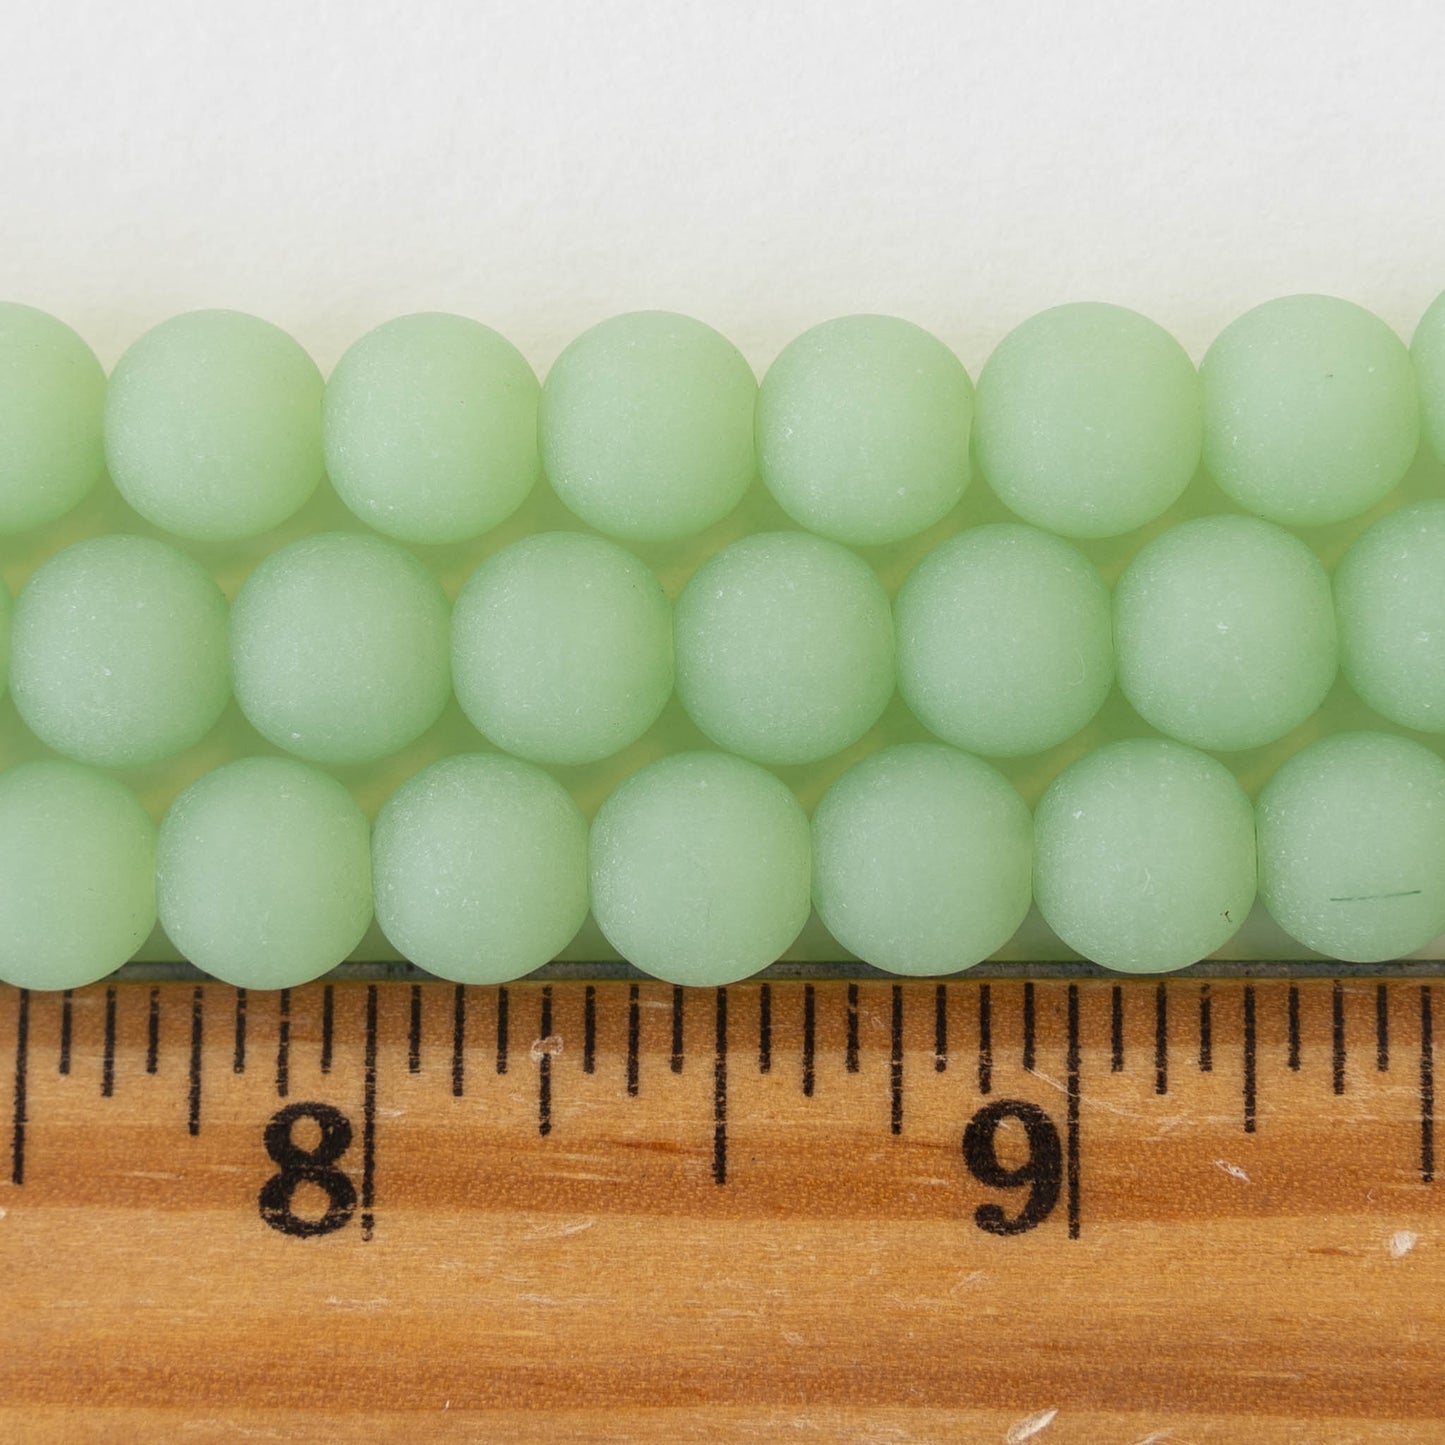 Load image into Gallery viewer, 10mm Frosted Glass Rounds - Opaque Celadon Green - 21 beads
